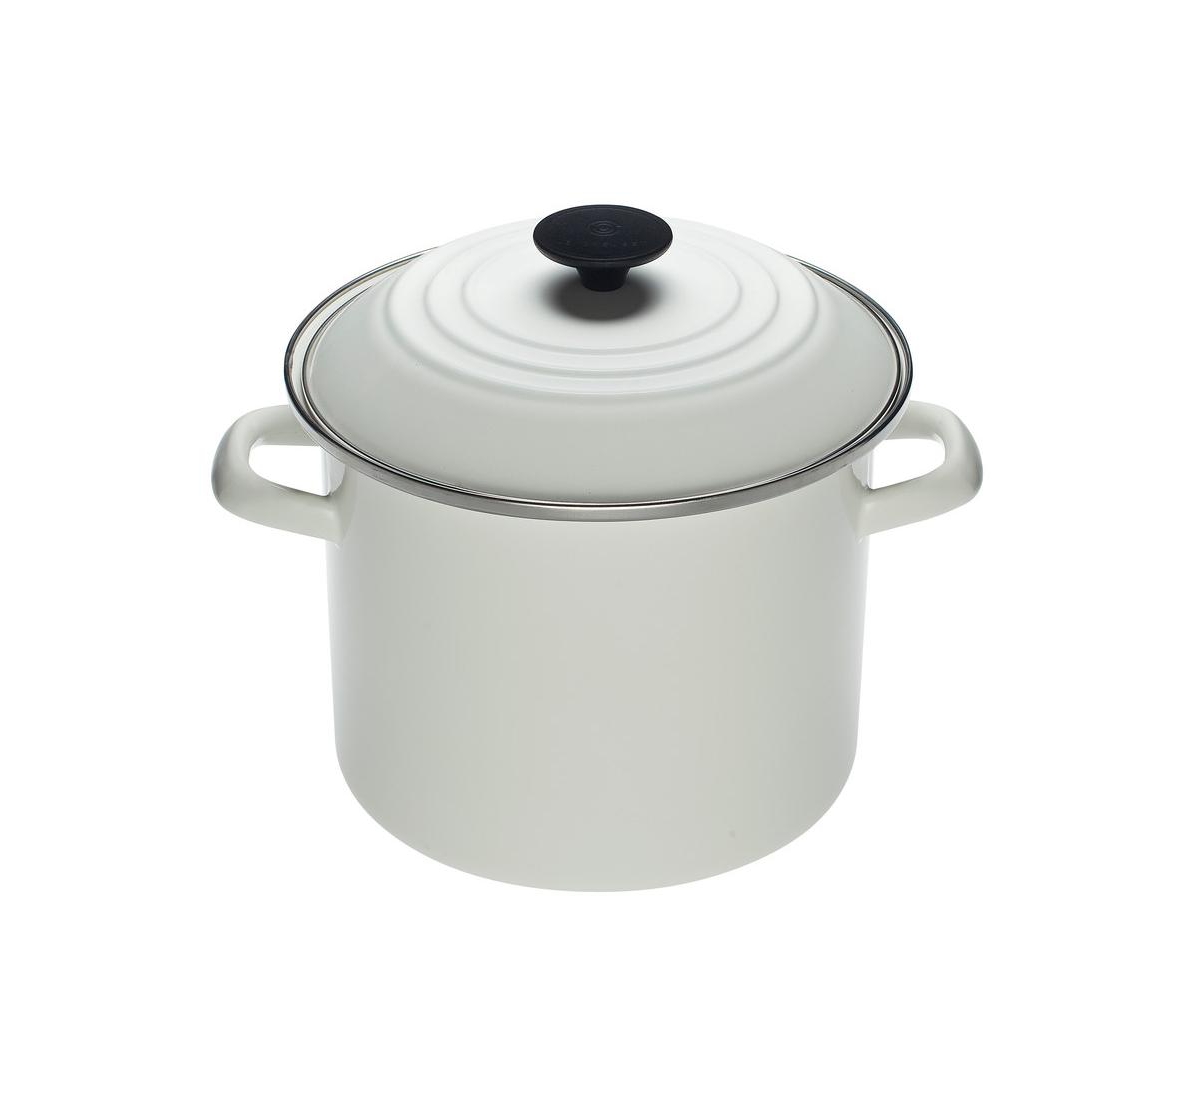 Le Creuset 8 Quart Enamel On Steel Stockpot With Lid In White